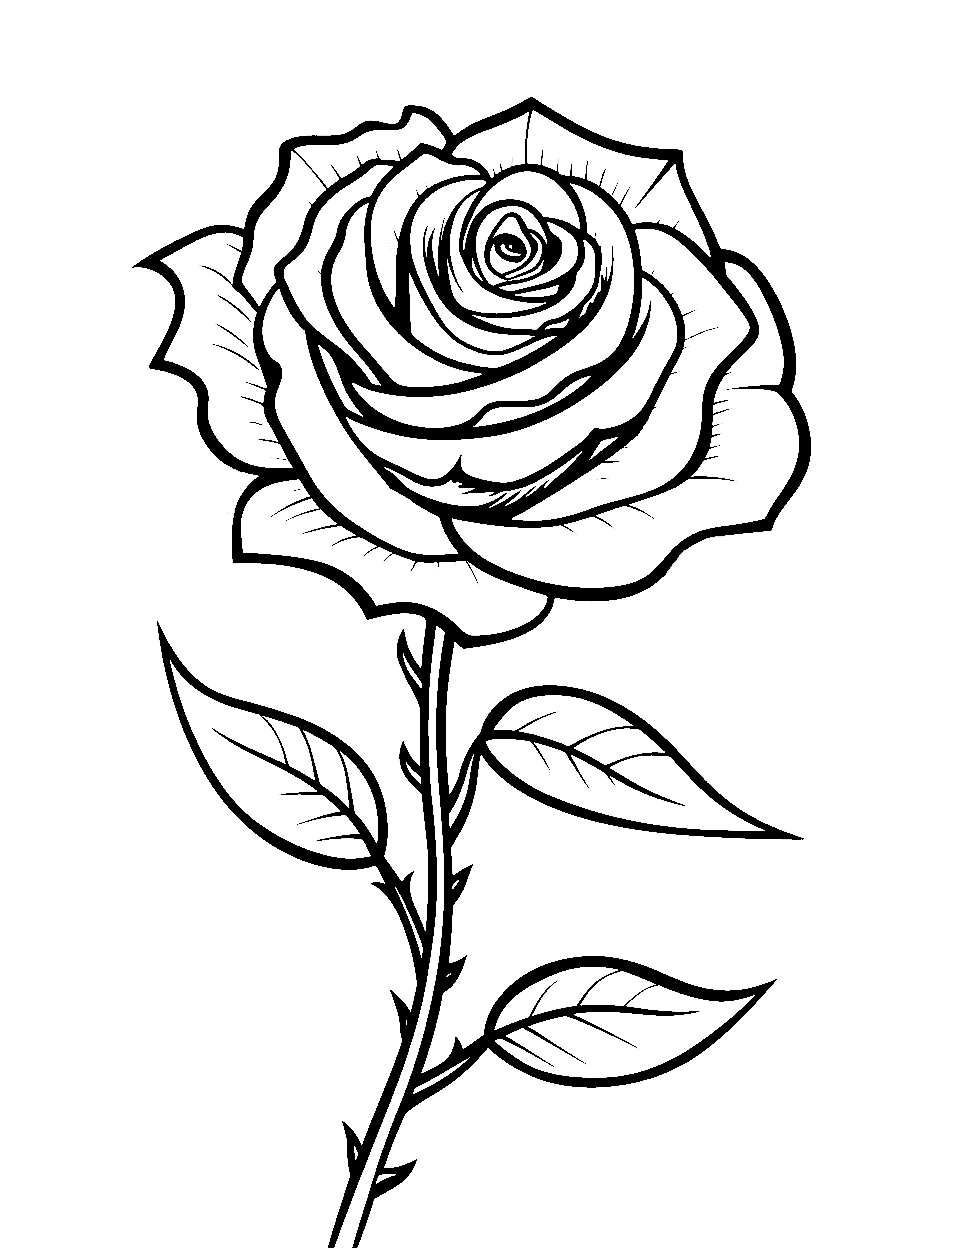 Tattoo Style Rose Coloring Page - A rose depicted in classic tattoo style, with bold outlines.